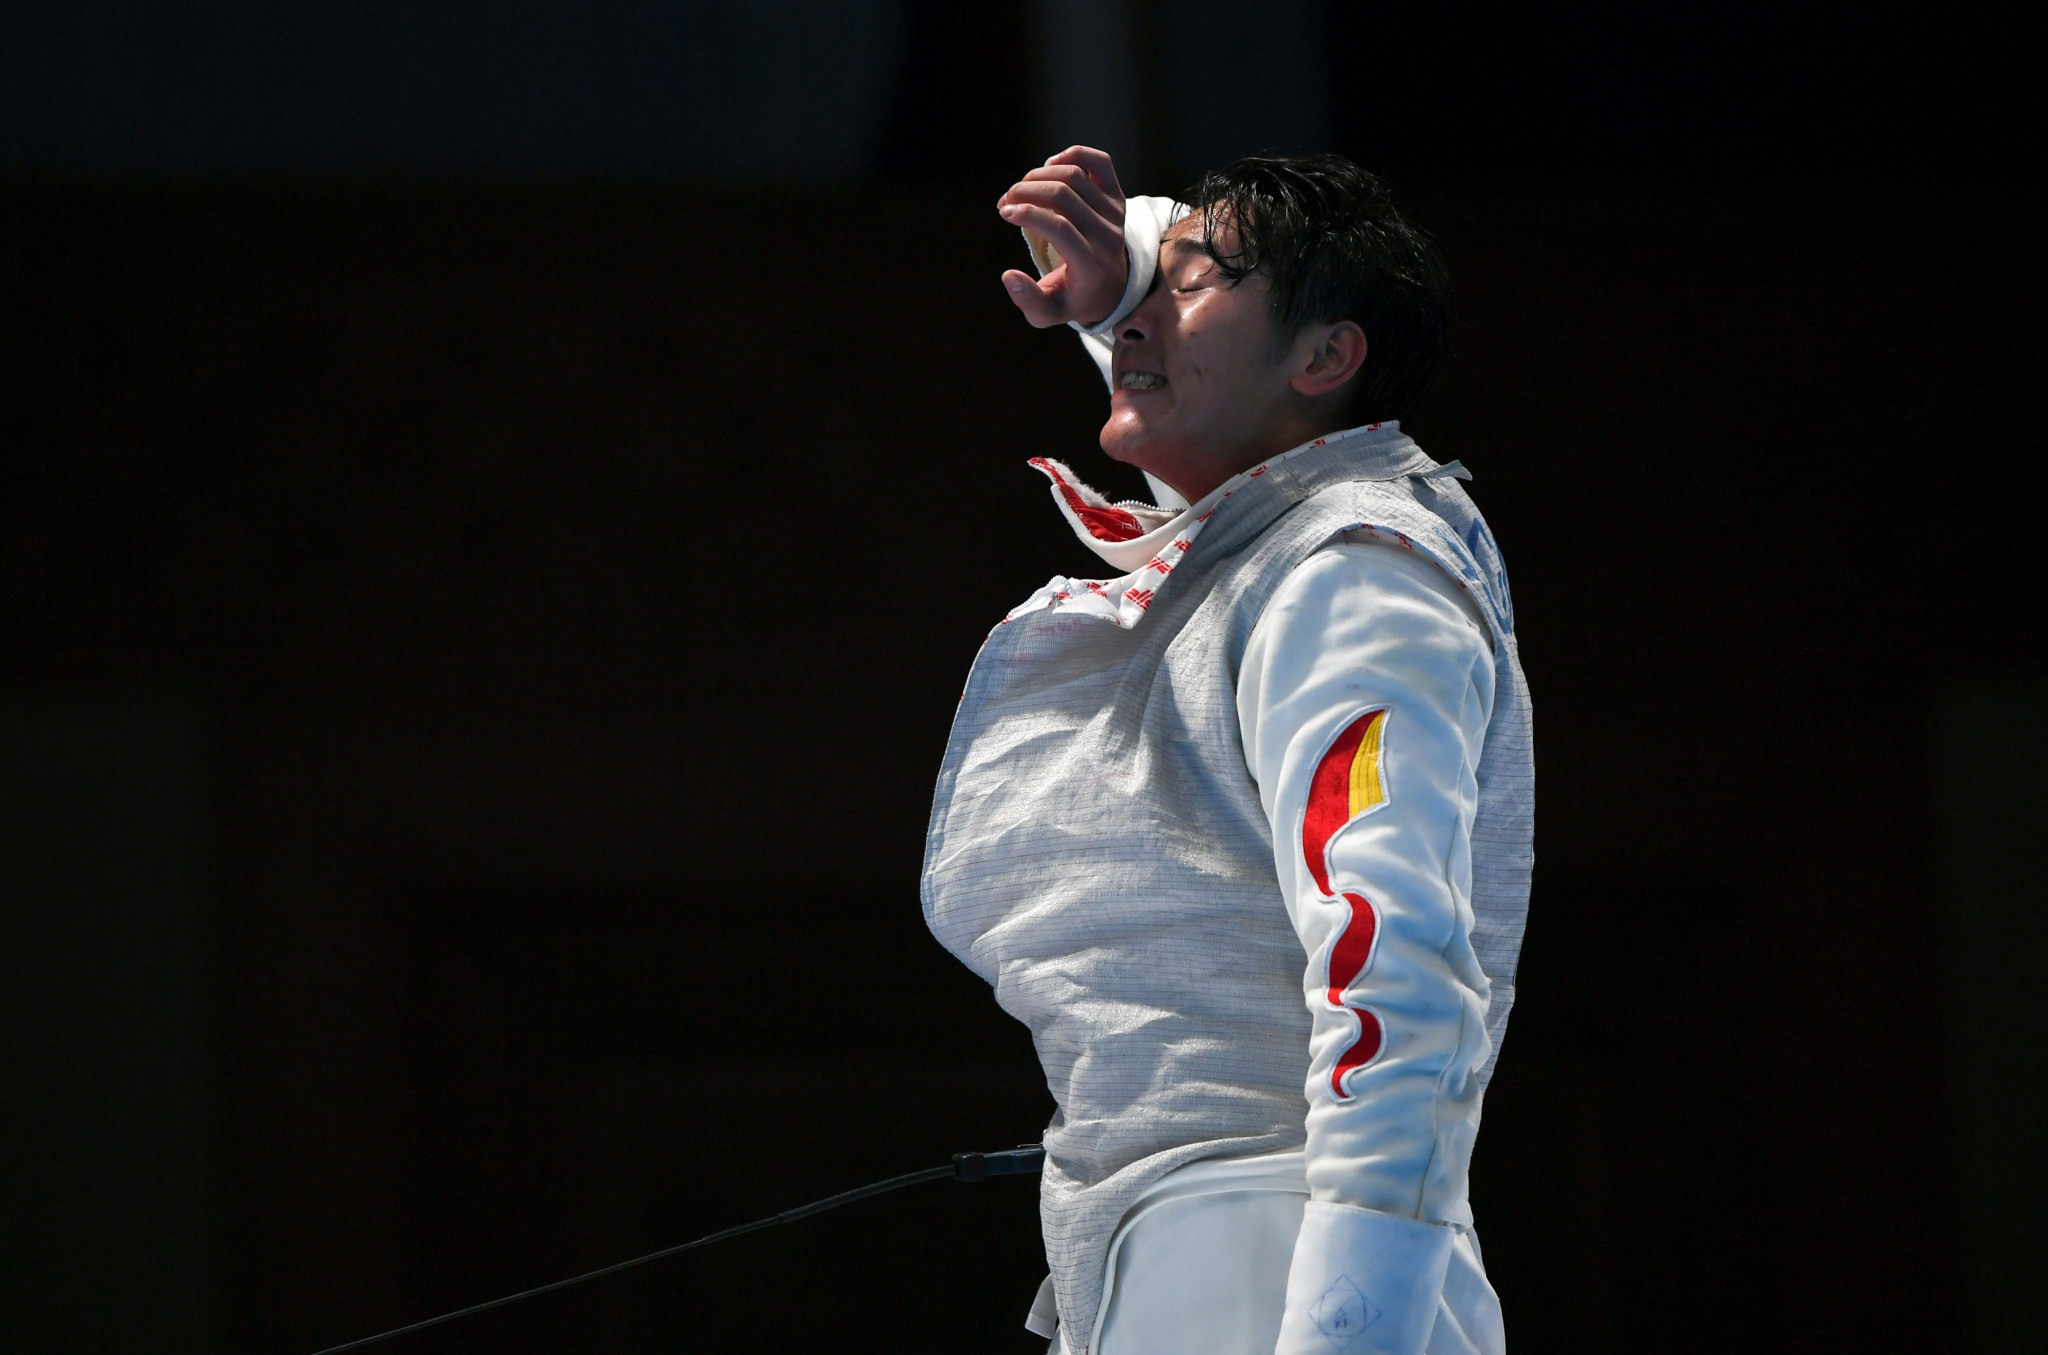 Asian Games champion Huang Mengkai of China has qualified for the Tokyo 2020 Olympics ©Getty Images